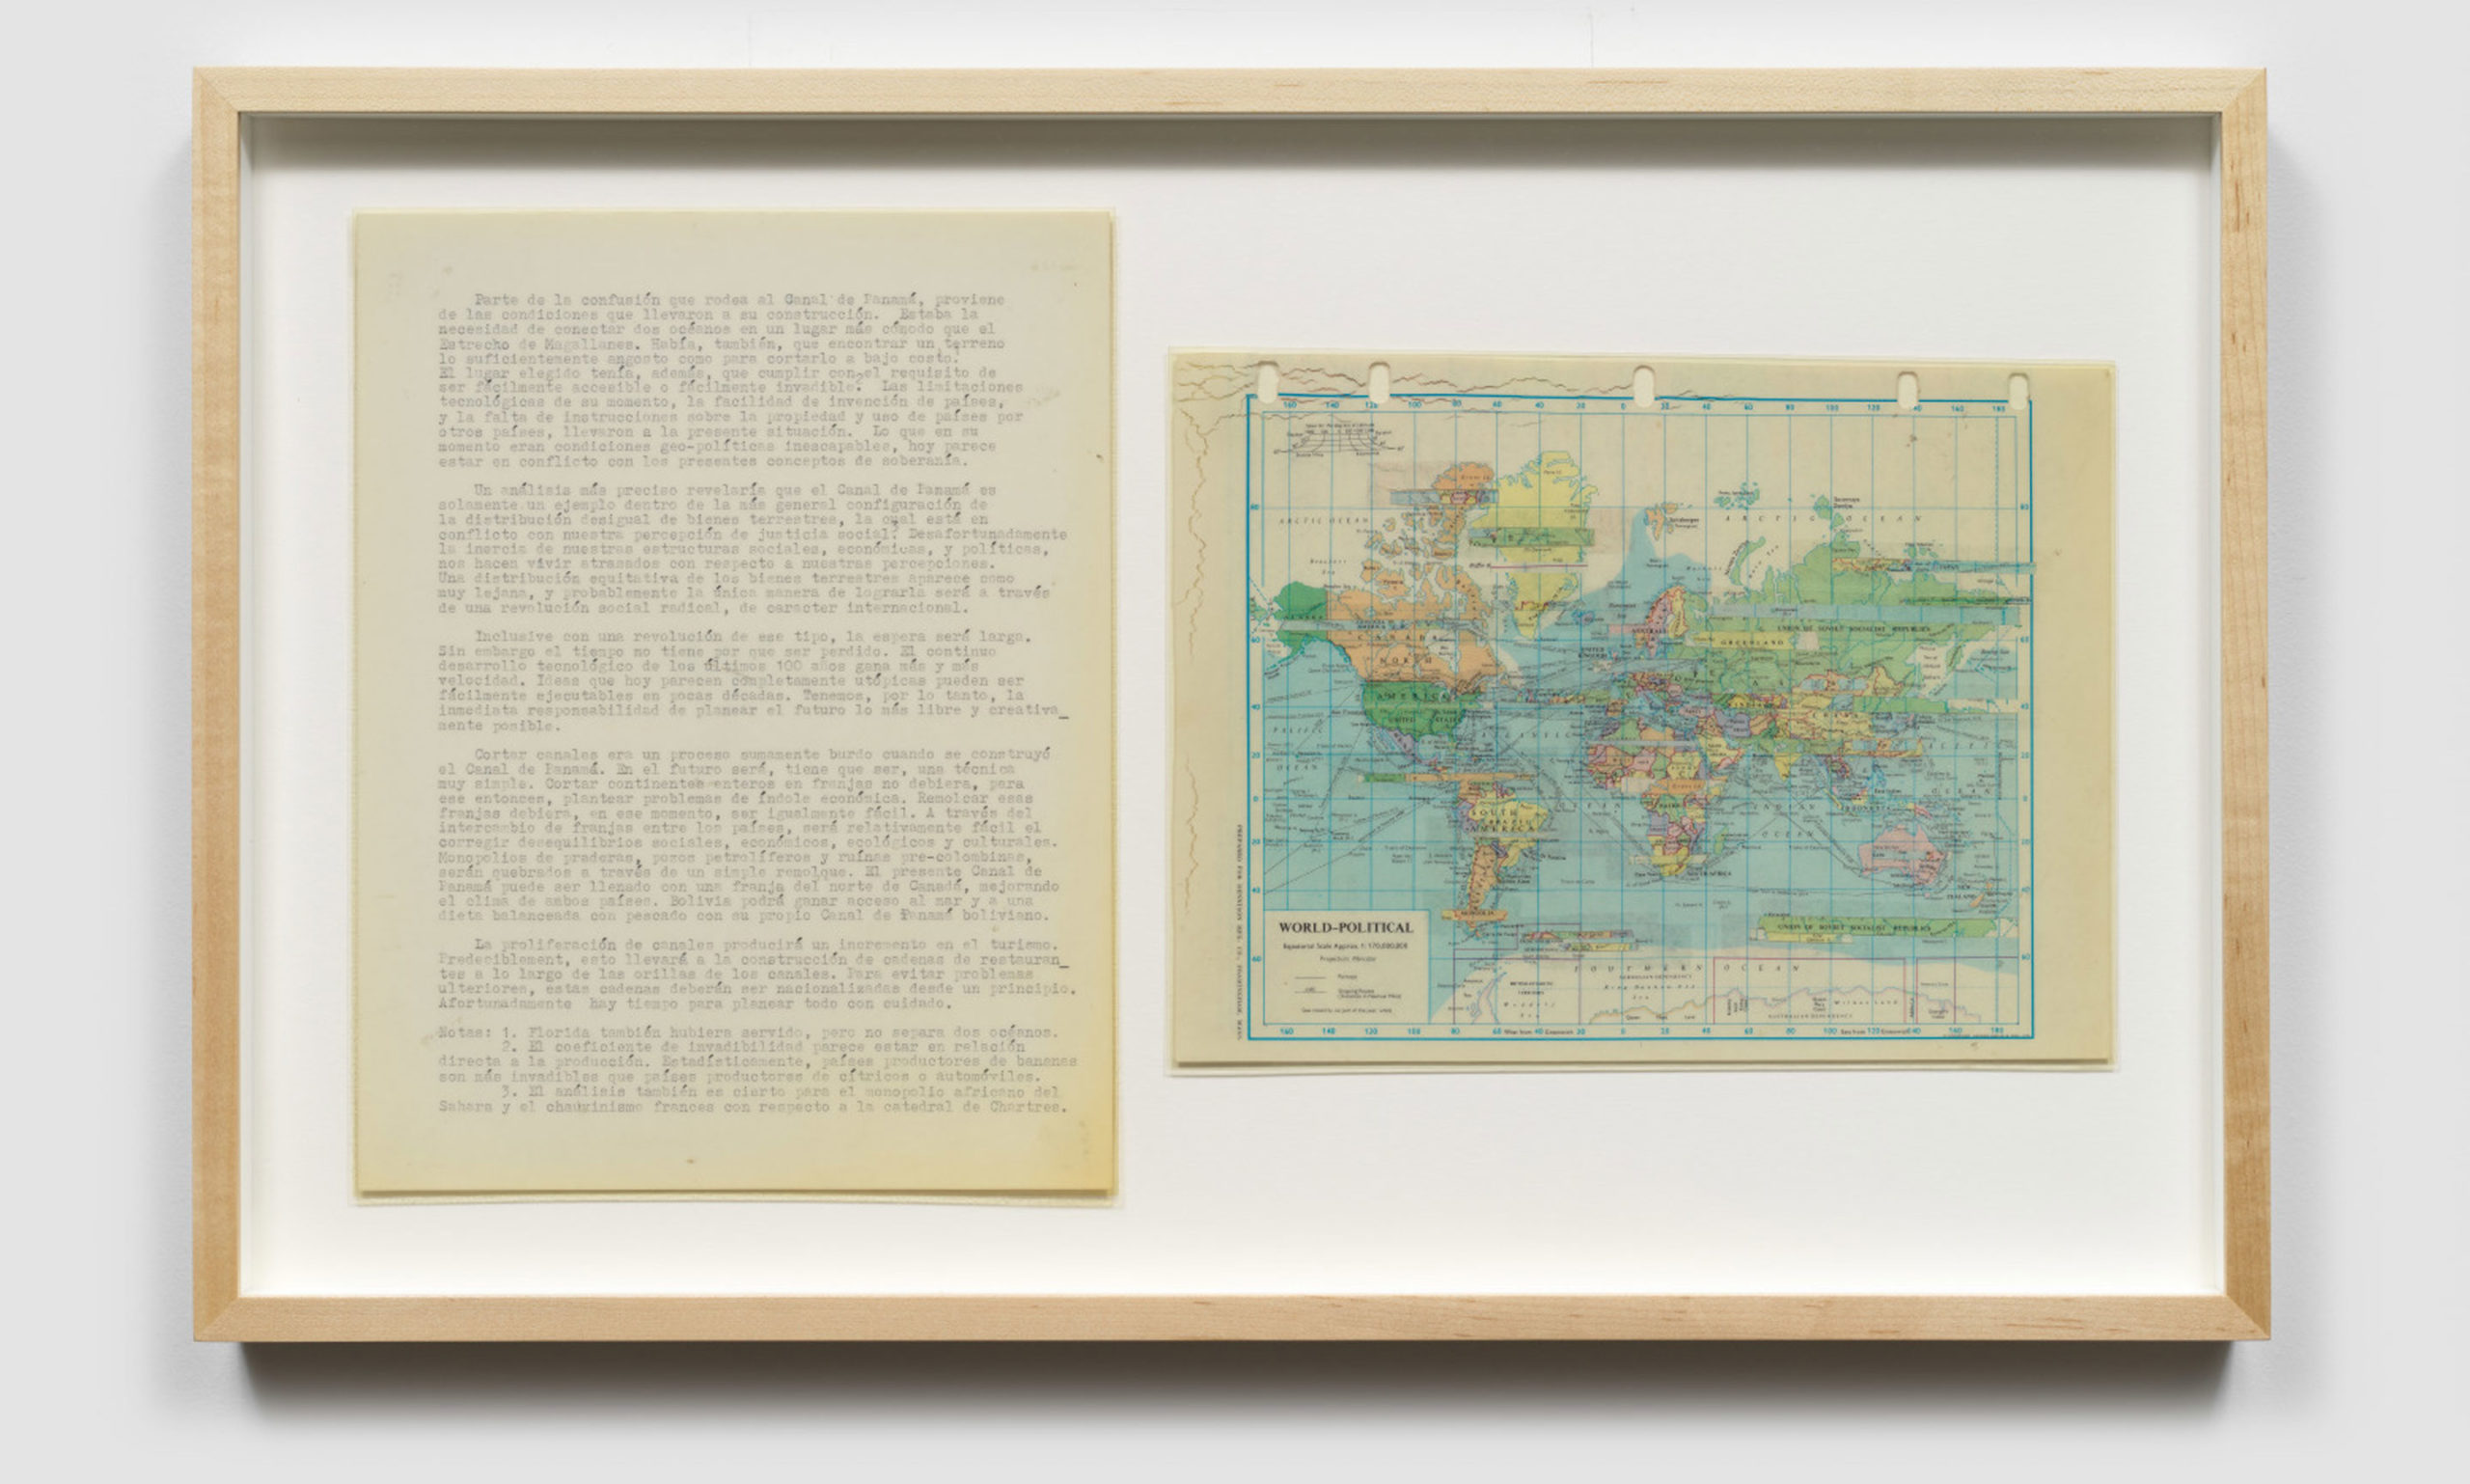 Luis Camnitzer, Canales, 1980. Typed document and map. Luis Camnitzer, New York and Alexander Gray Gallery, New York.